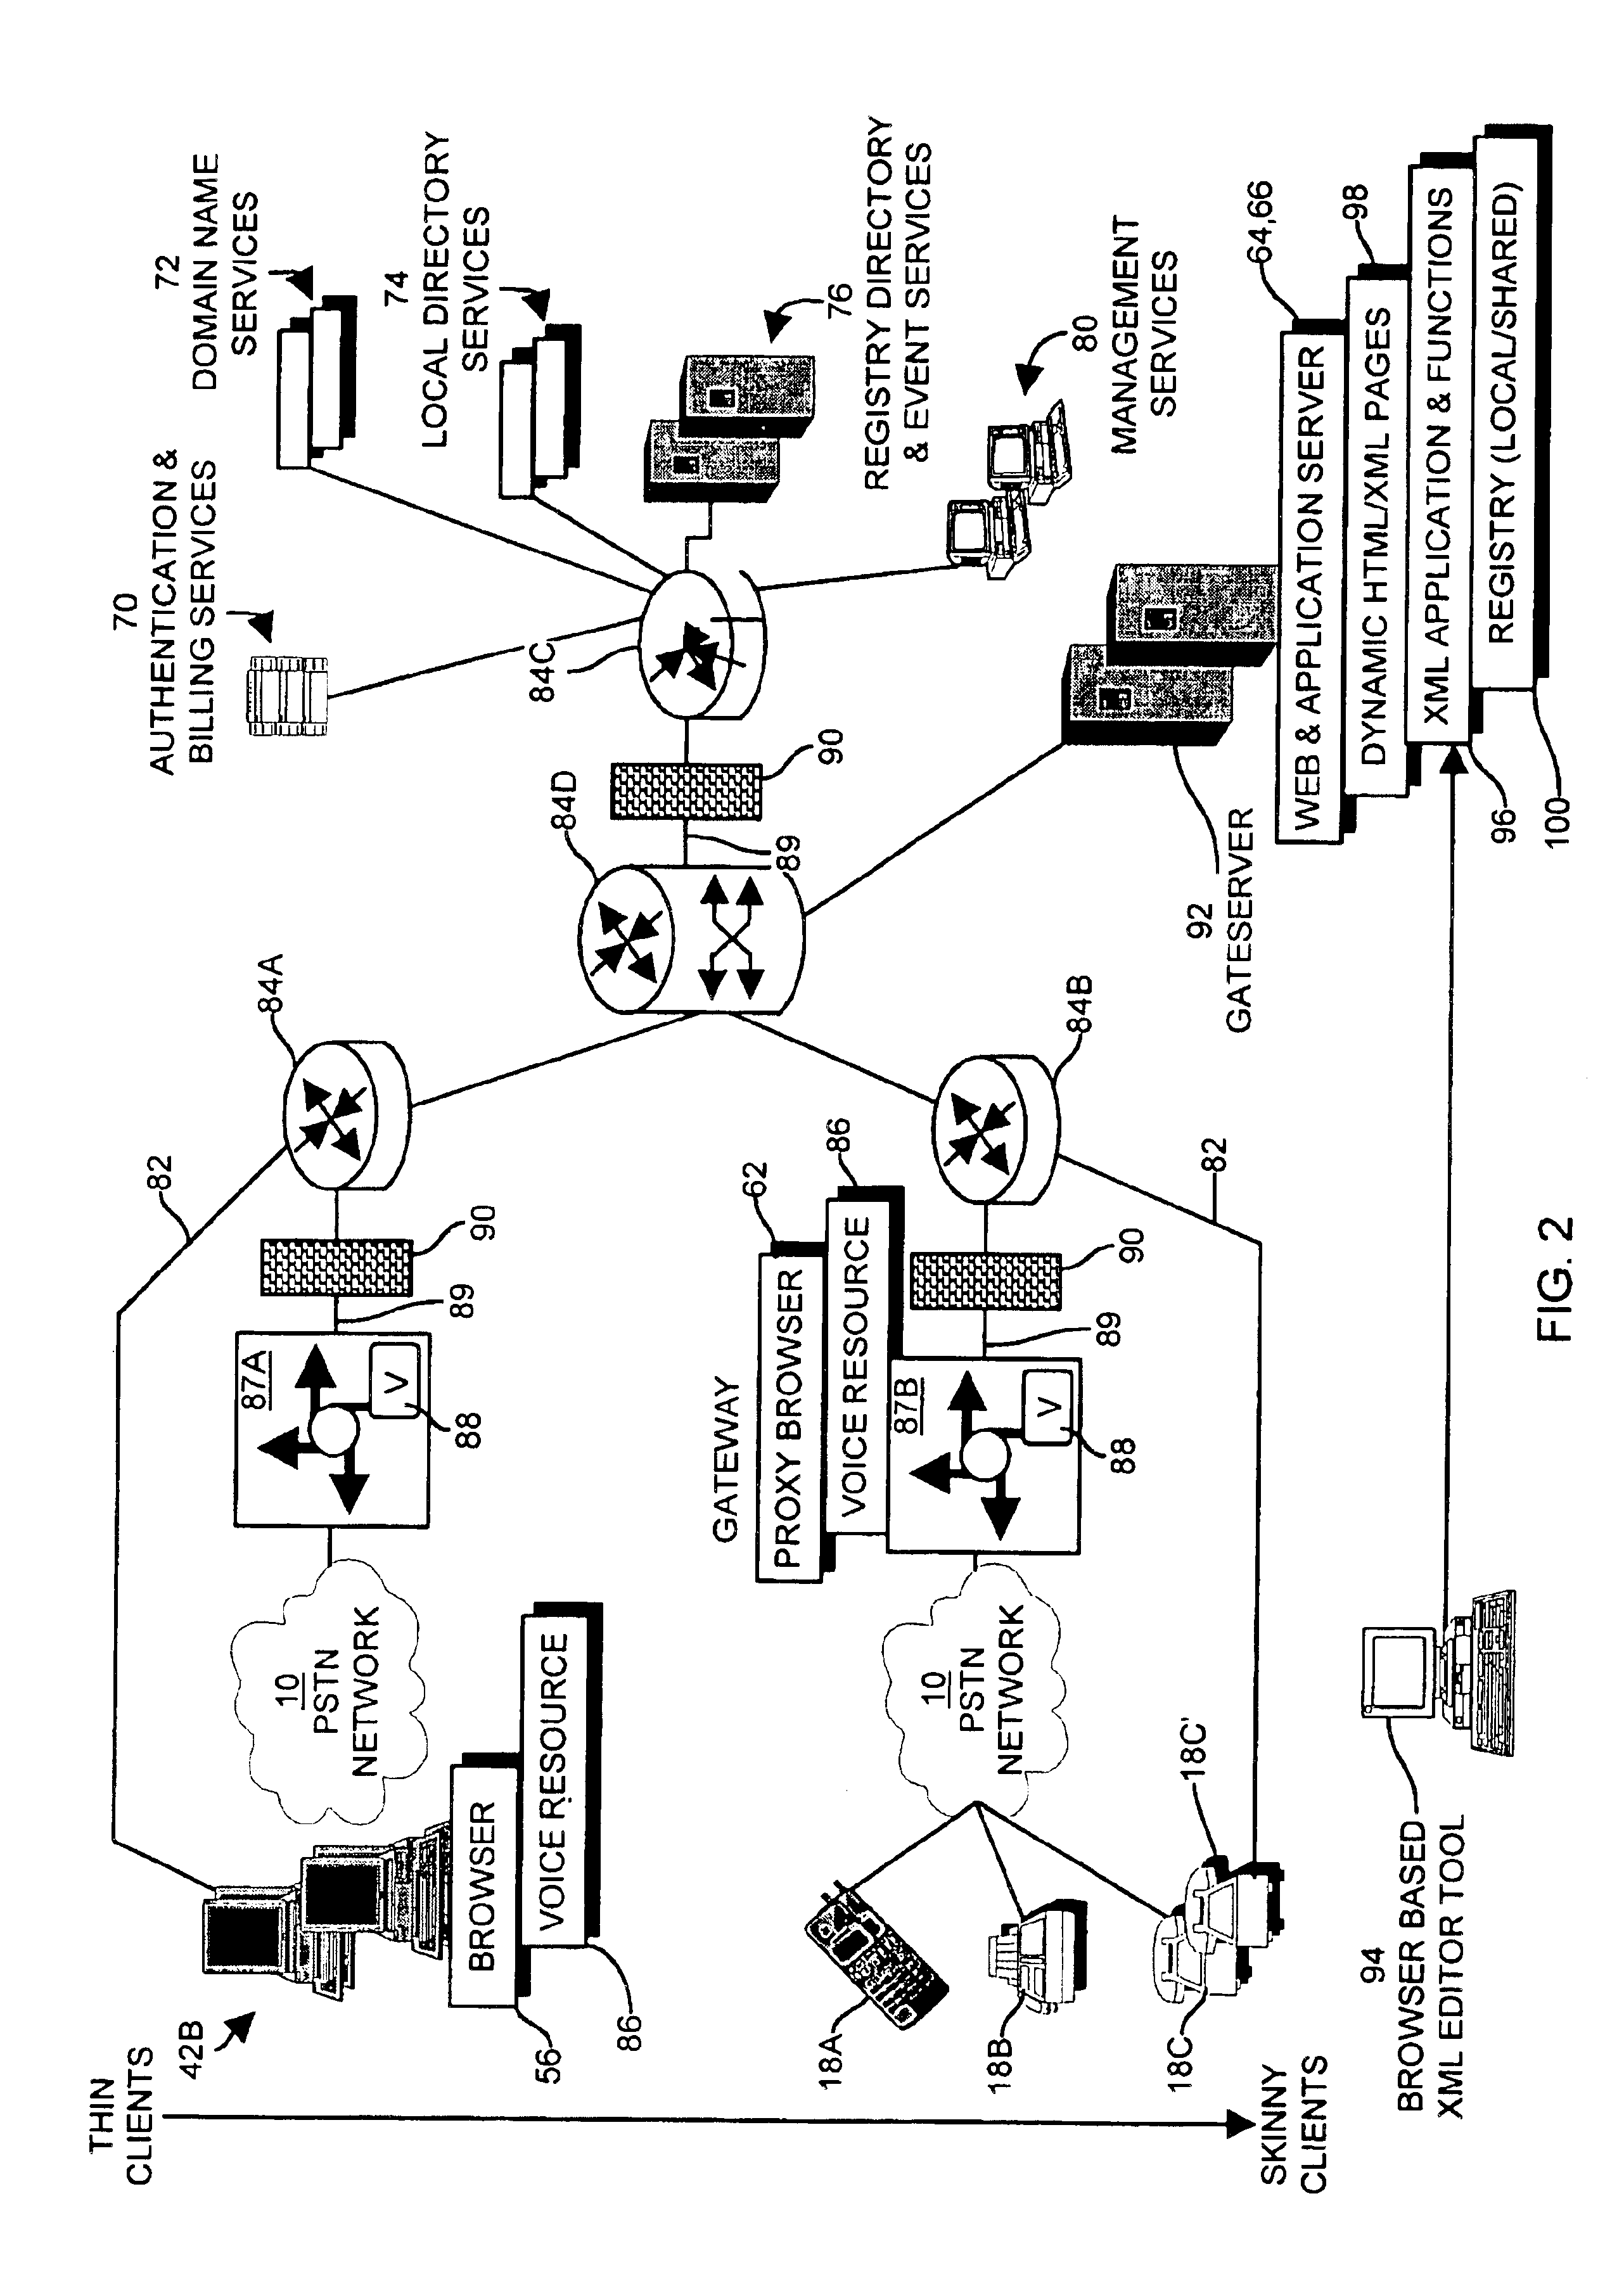 Apparatus and methods for providing an event driven notification over a network to a telephony device